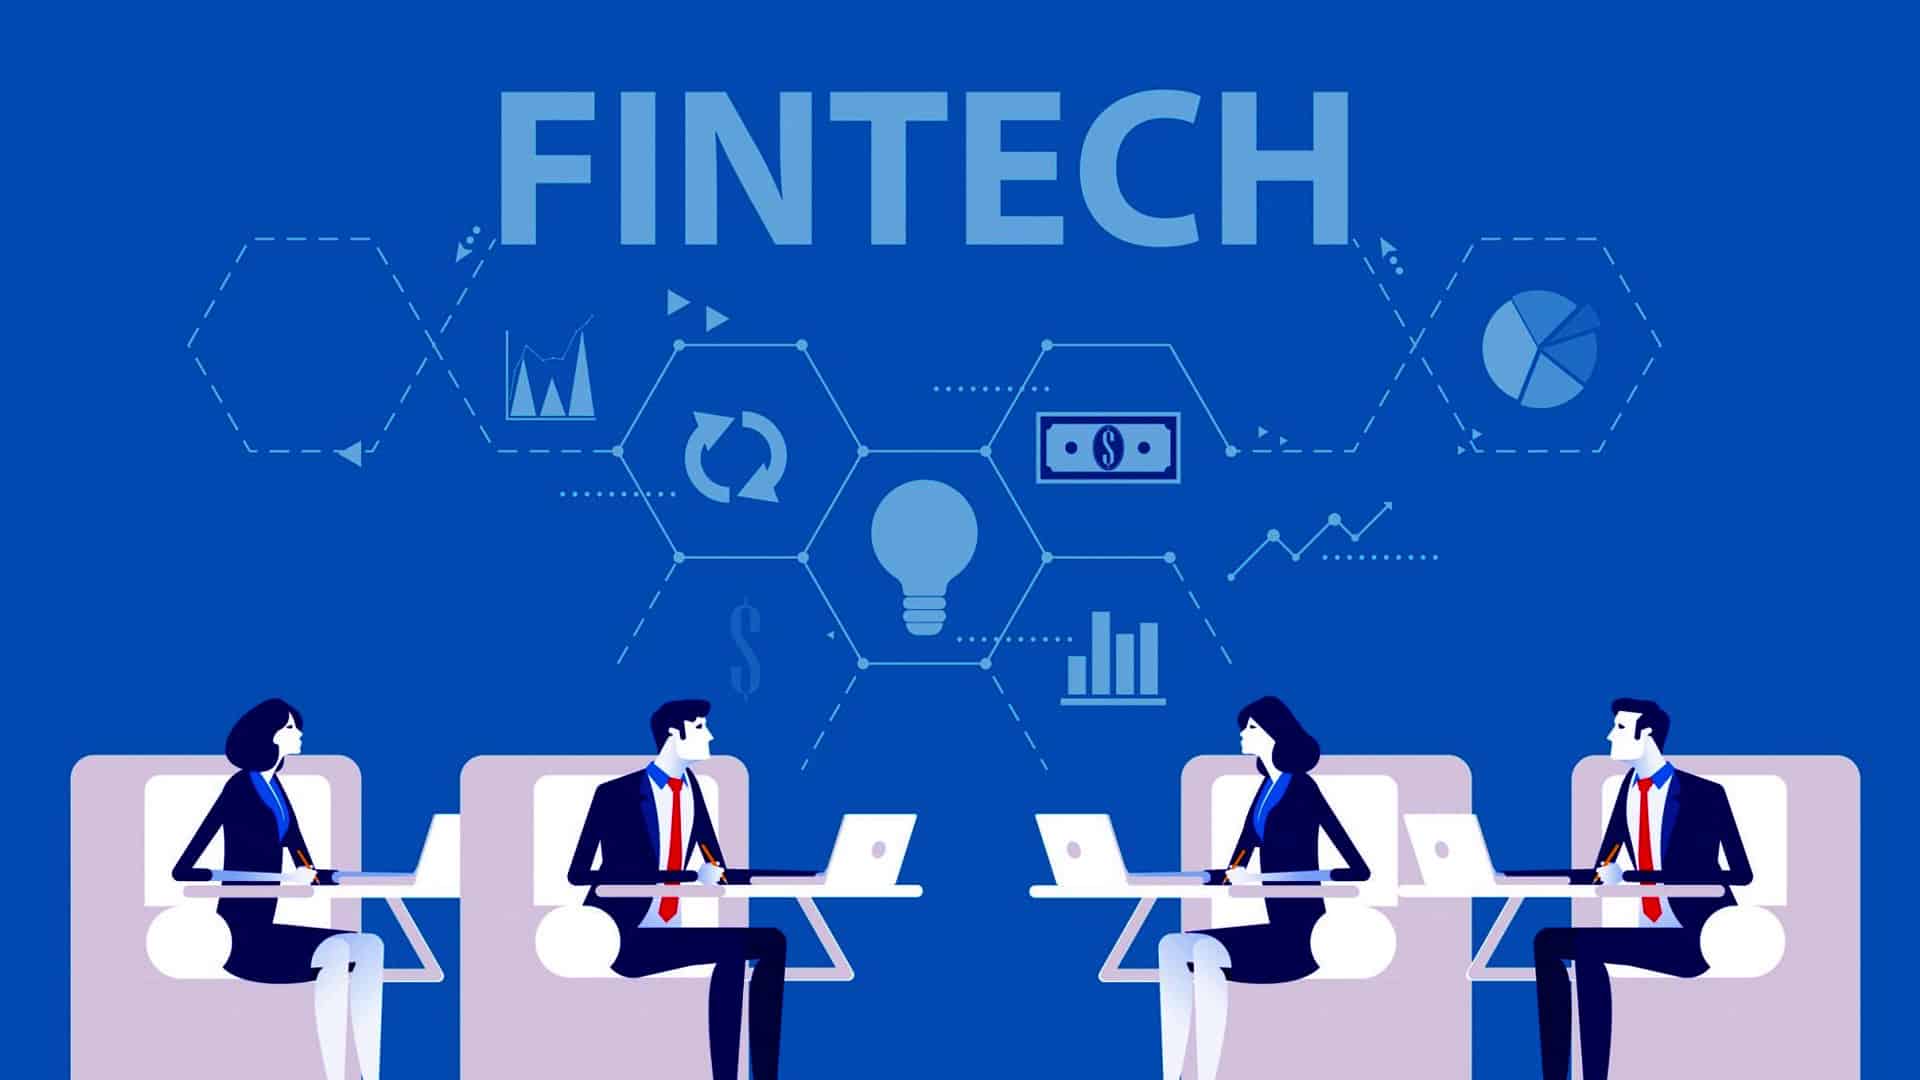 8 entities to test fintech products for MSME lending under RBI's regulatory sandbox